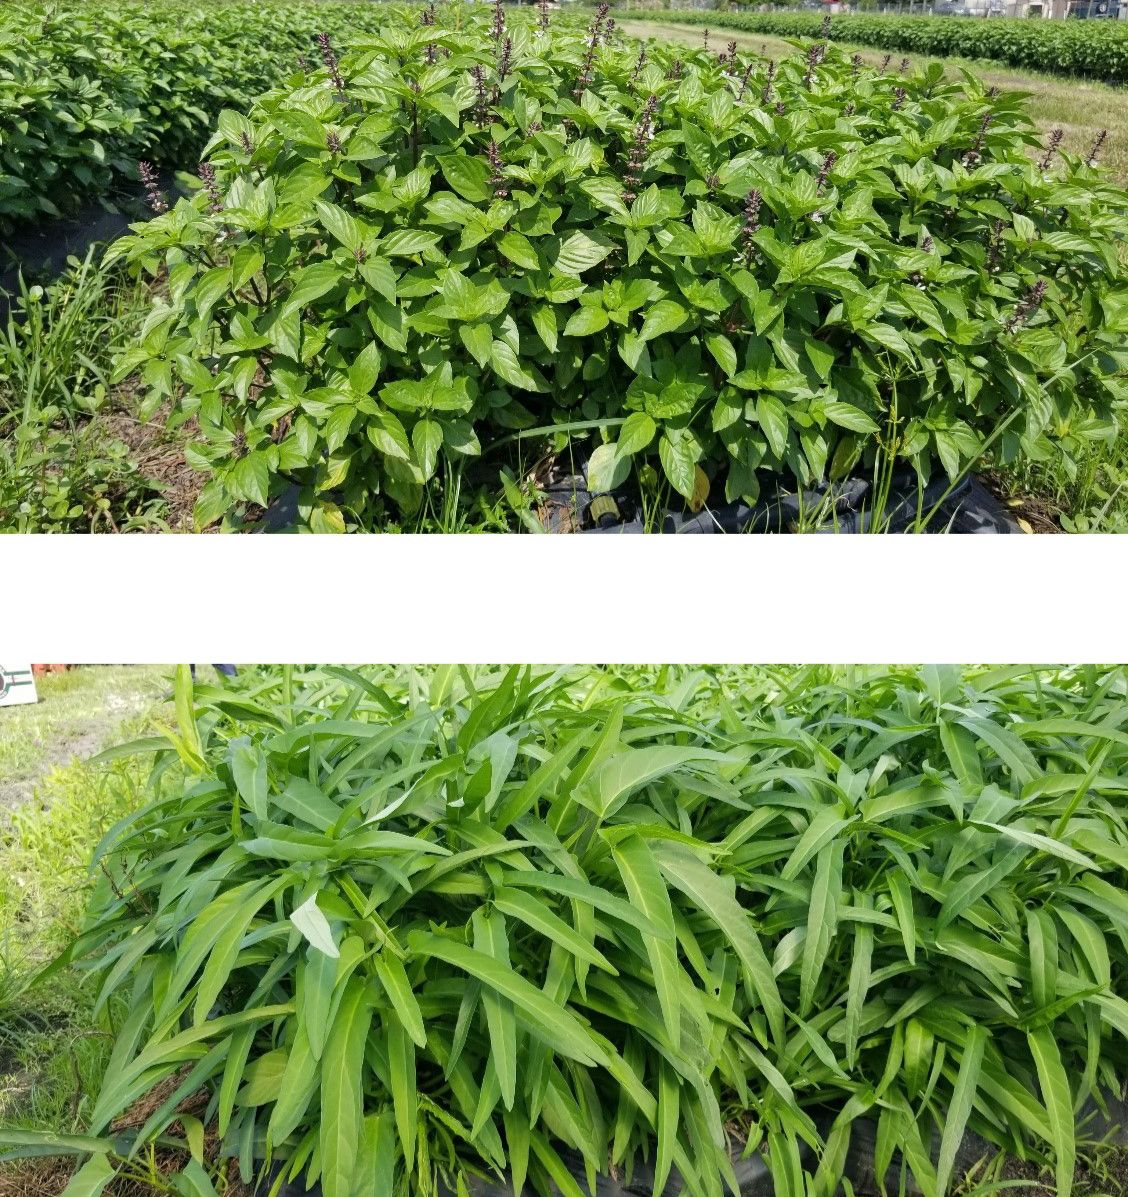 Two most commonly grown vegetables in Asian vegetable farms: top, Thai basil and bottom, water spinach. 